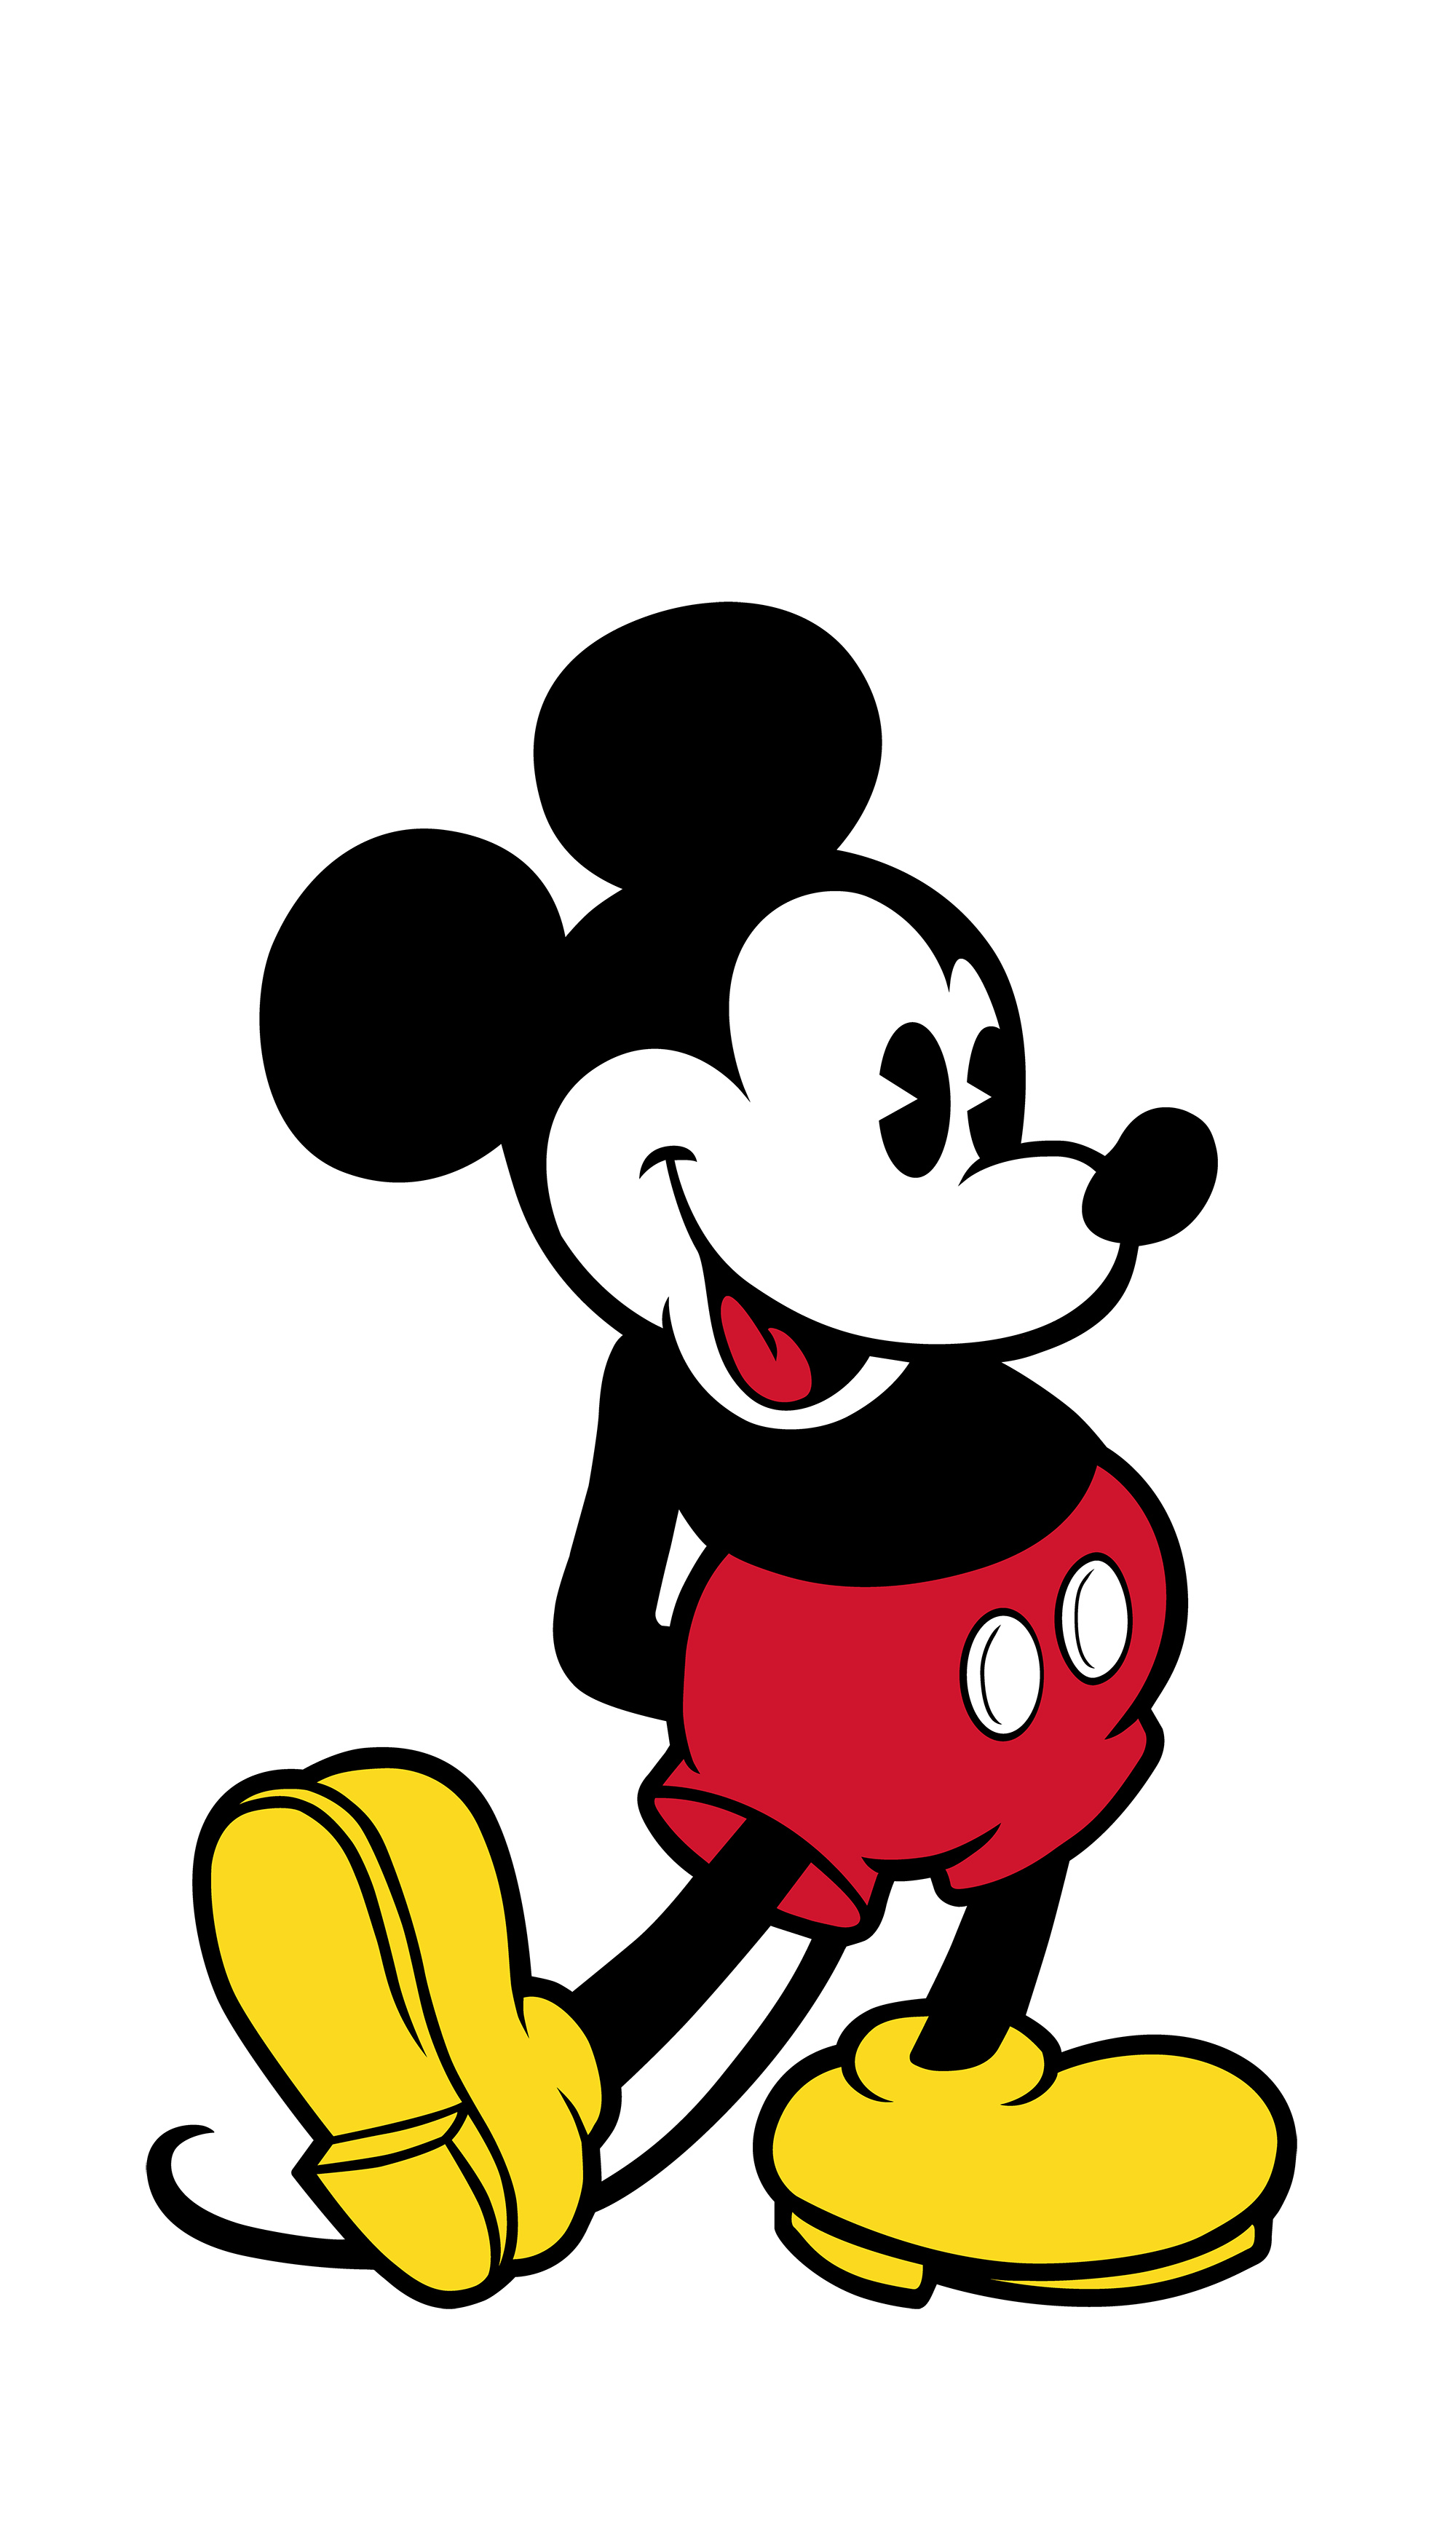 Disney wallpapers for iPhone, 140 iconic designs, Creative backgrounds, 2000x3500 HD Handy